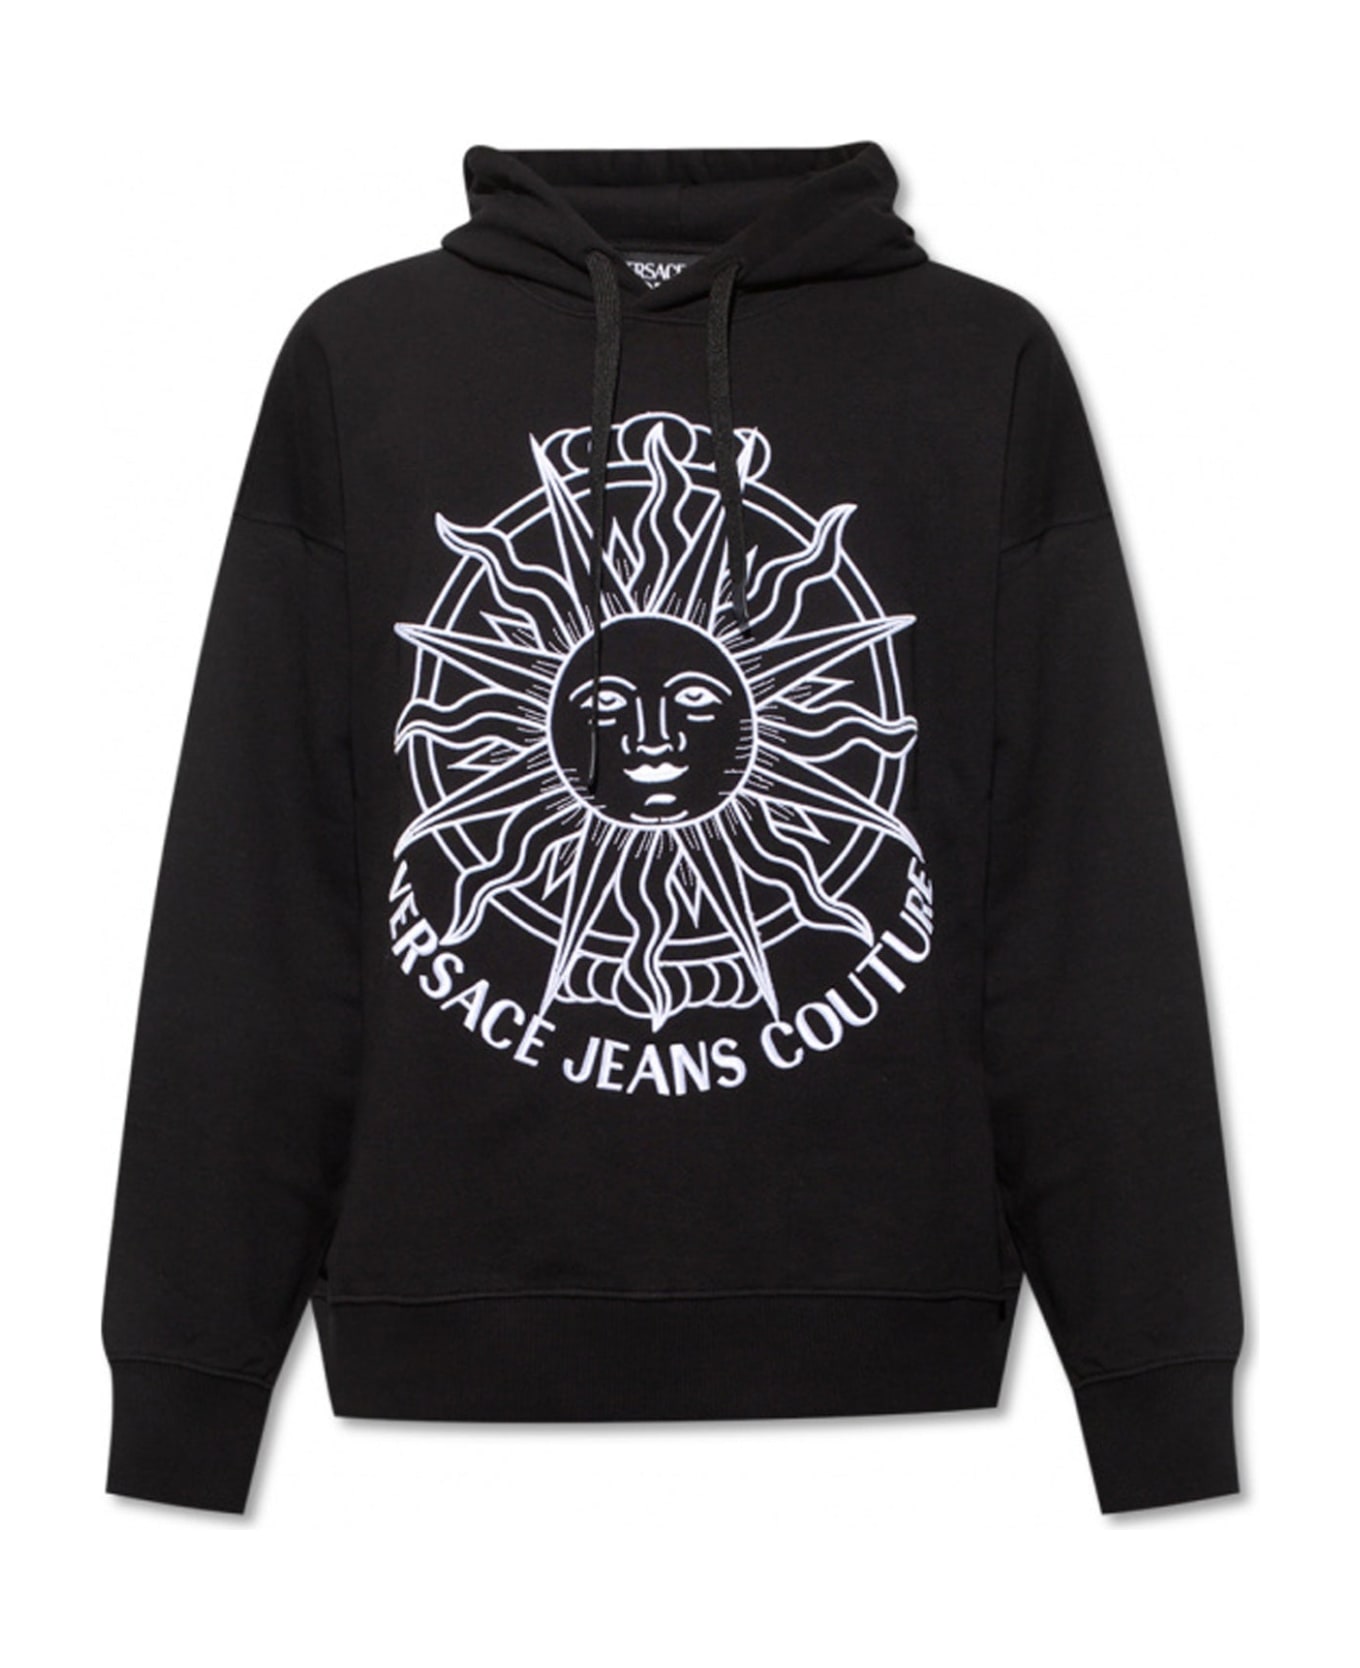 Versace Jeans Couture Jeans Couture Hooded Sweatshirt - Black